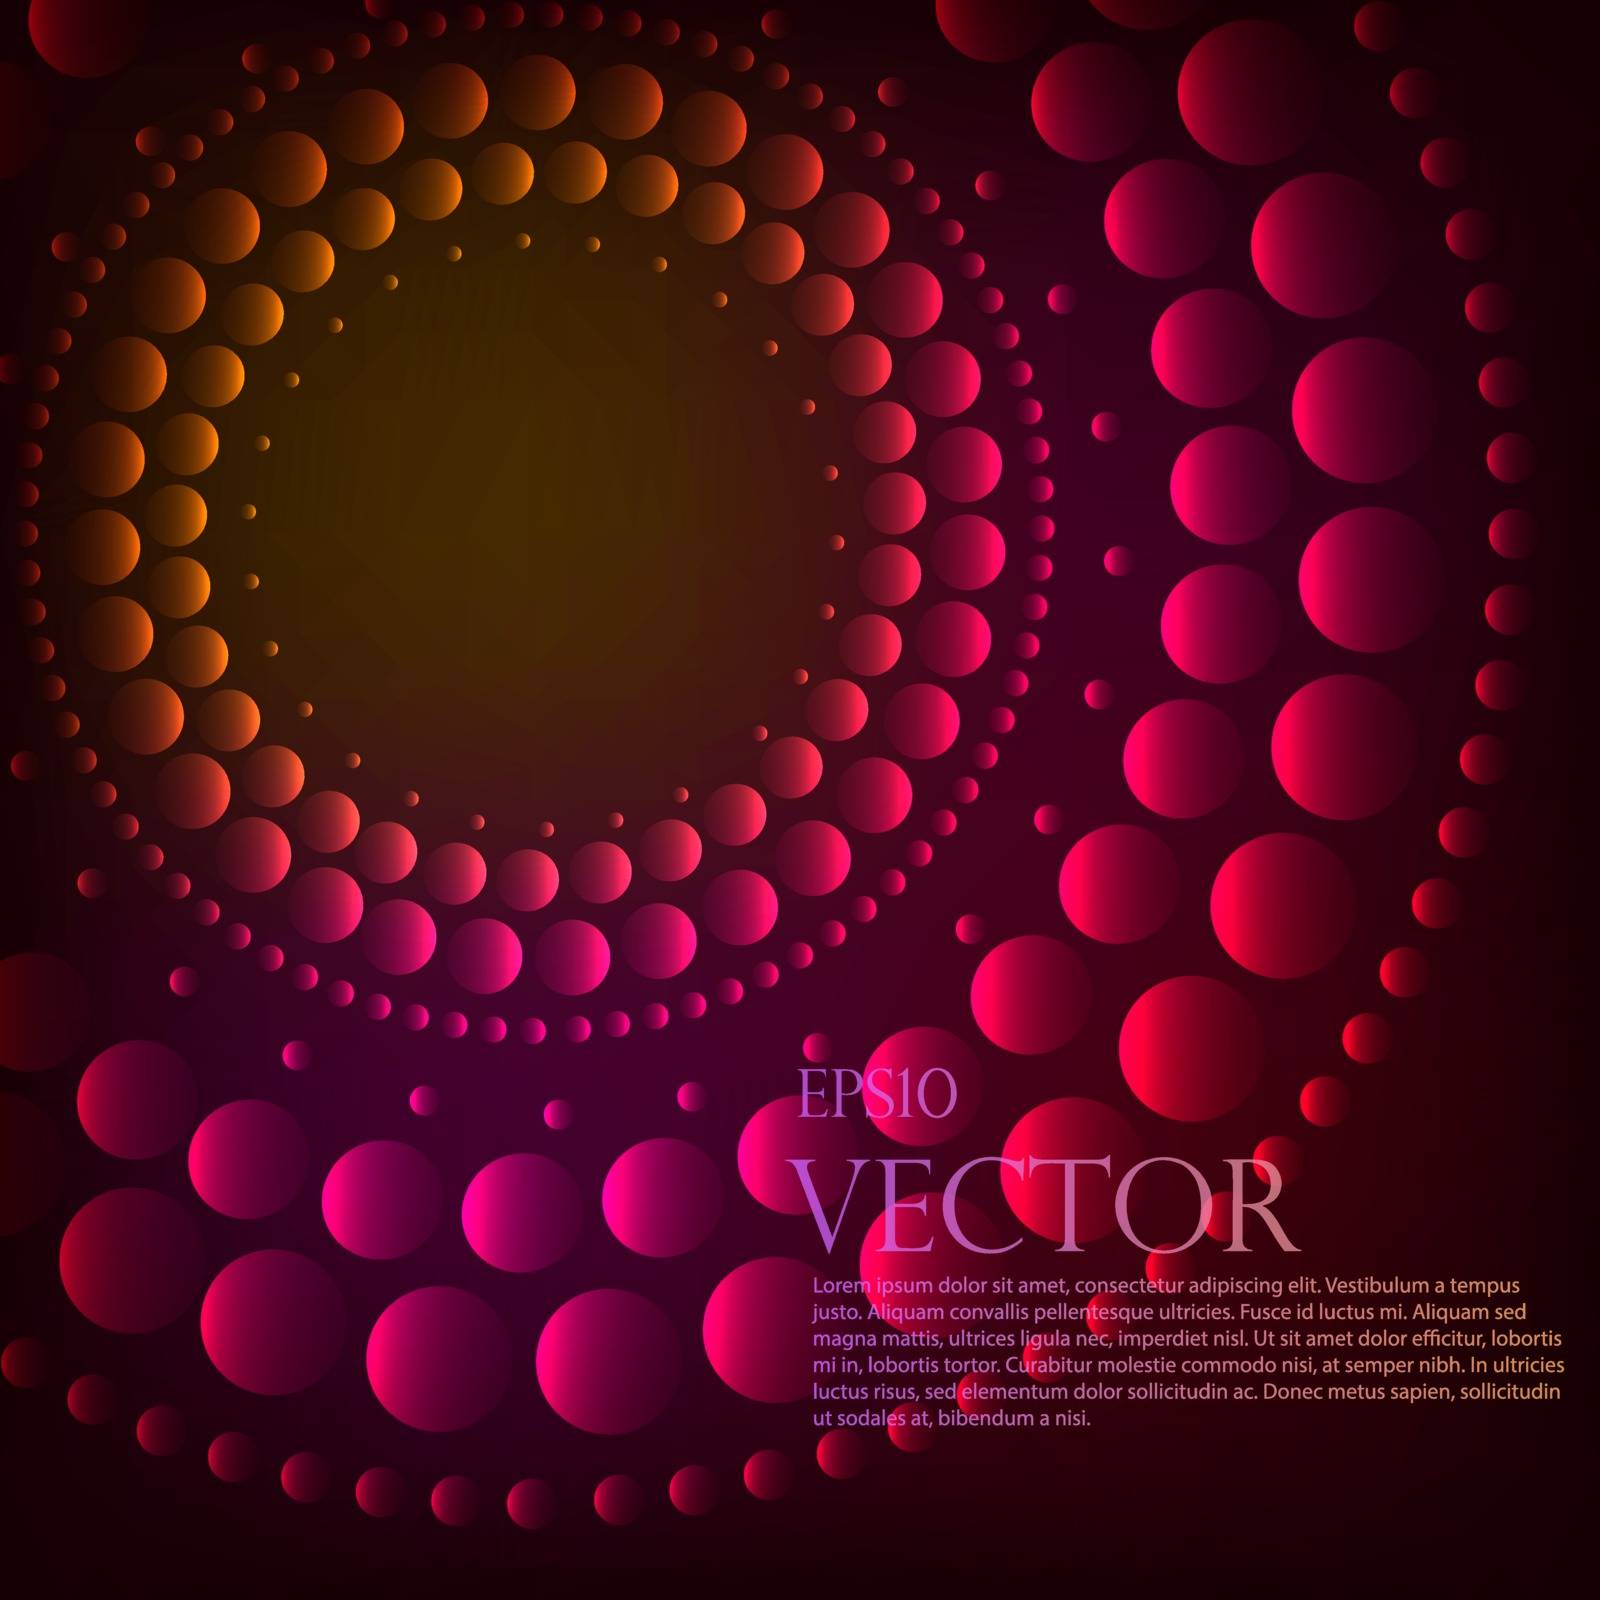 Abstract pattern of red graduated turquoise shiny dots or circles going from the darkest at the outer edge around a central black hole or vortex with copyspace